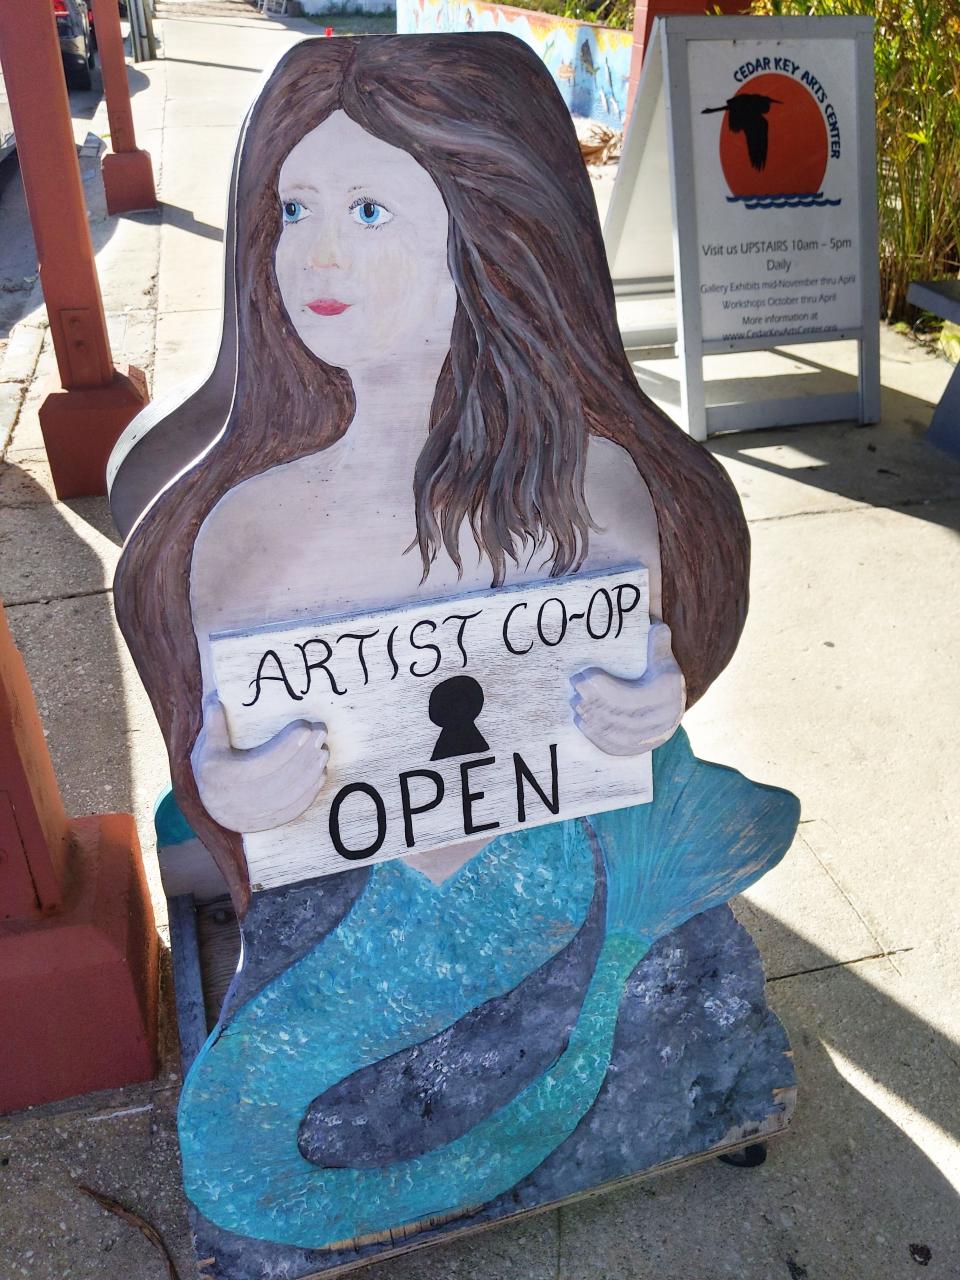 A mermaid sign for an artist coop gallery saying it's open.